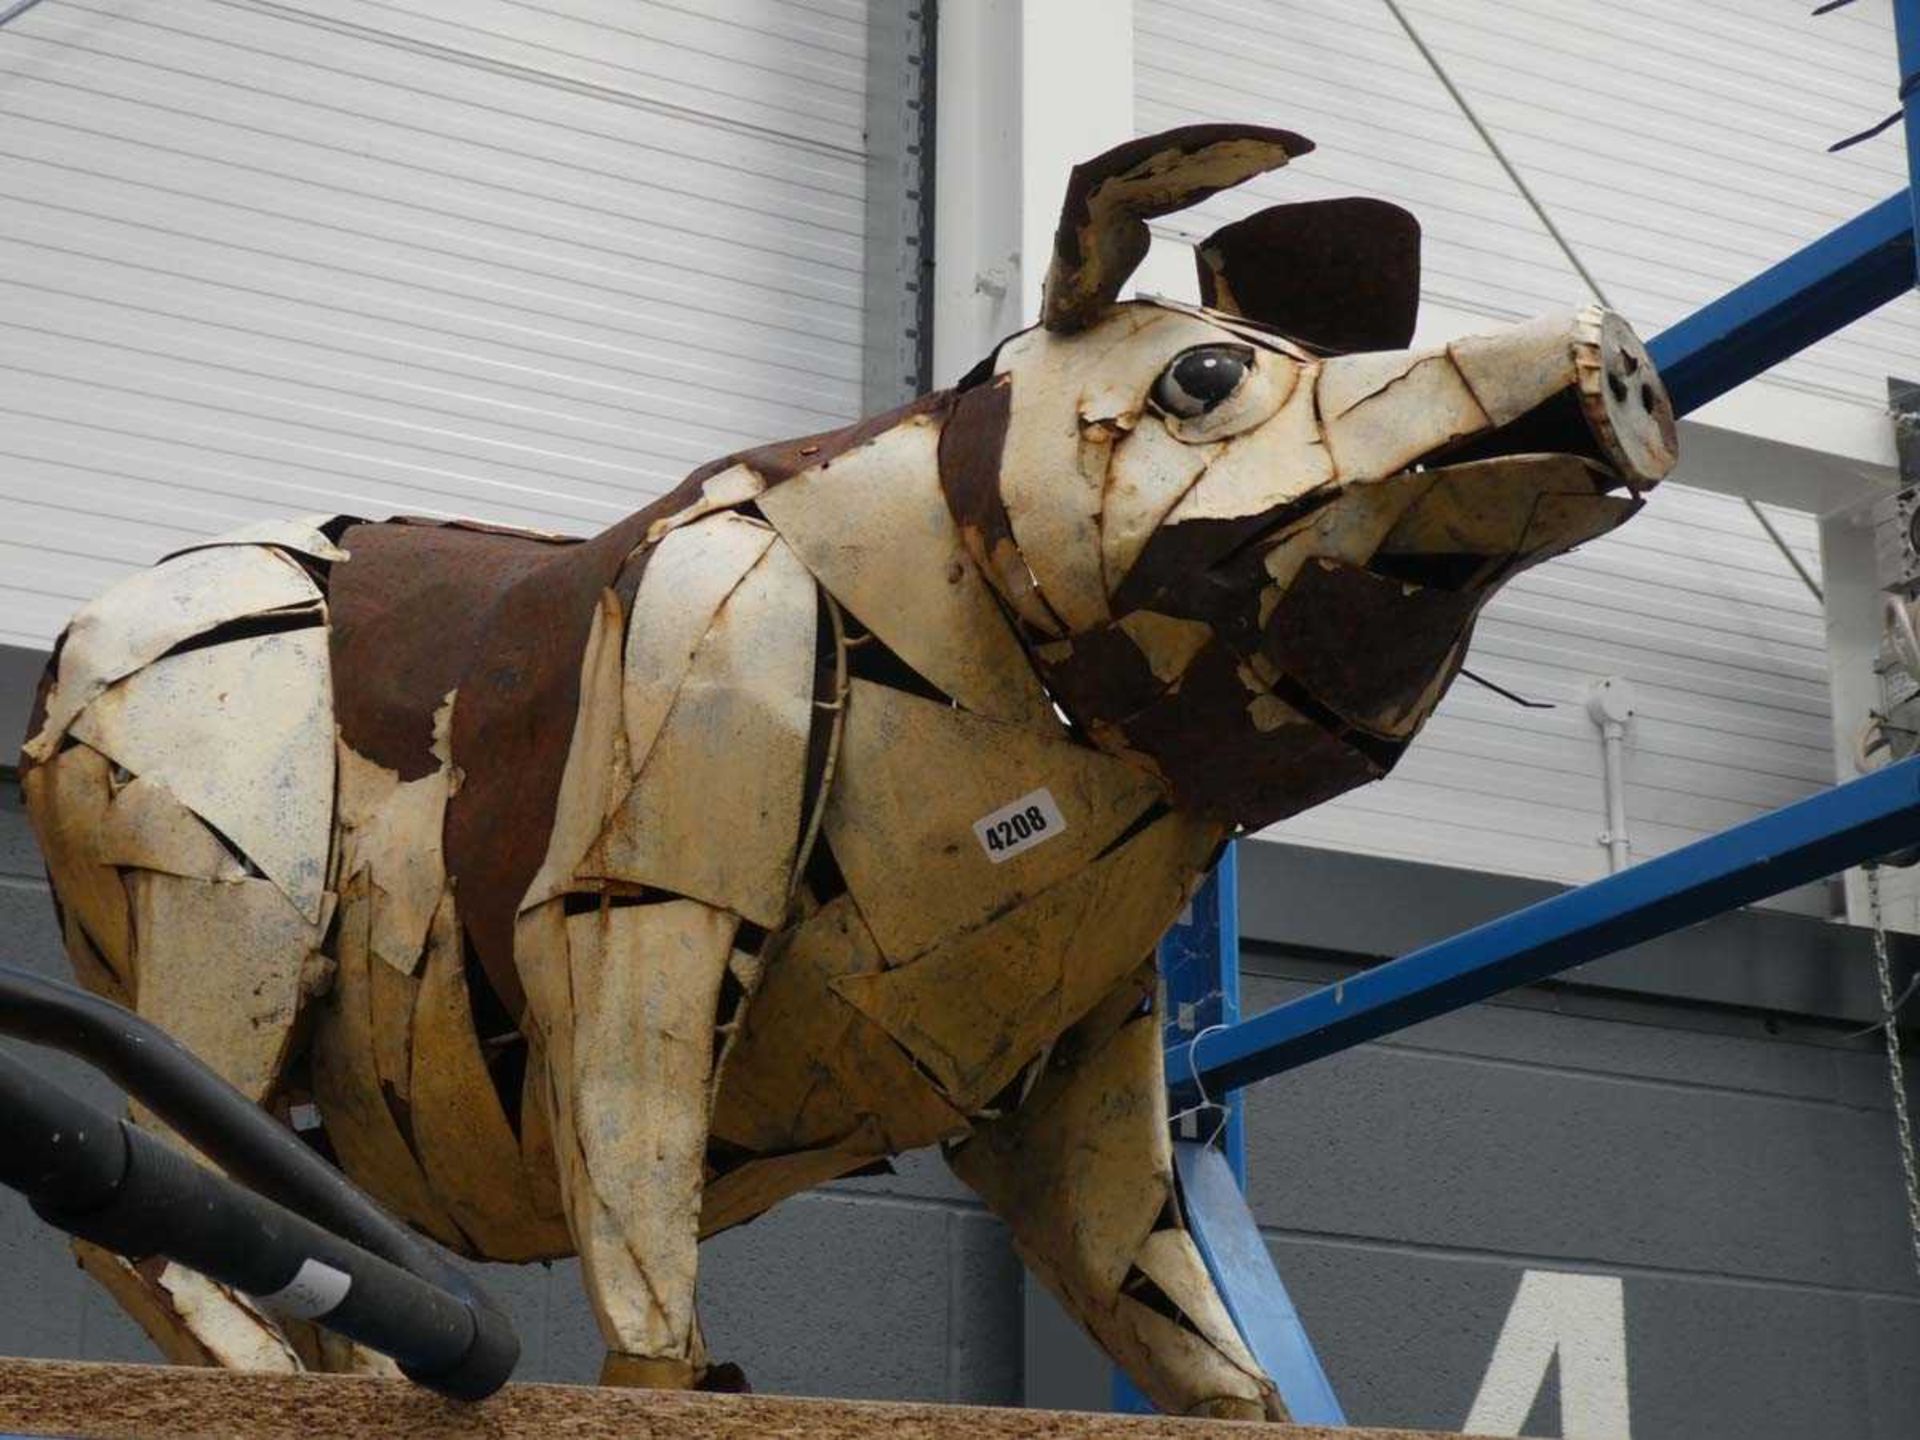 Large metal work garden ornament of a pig